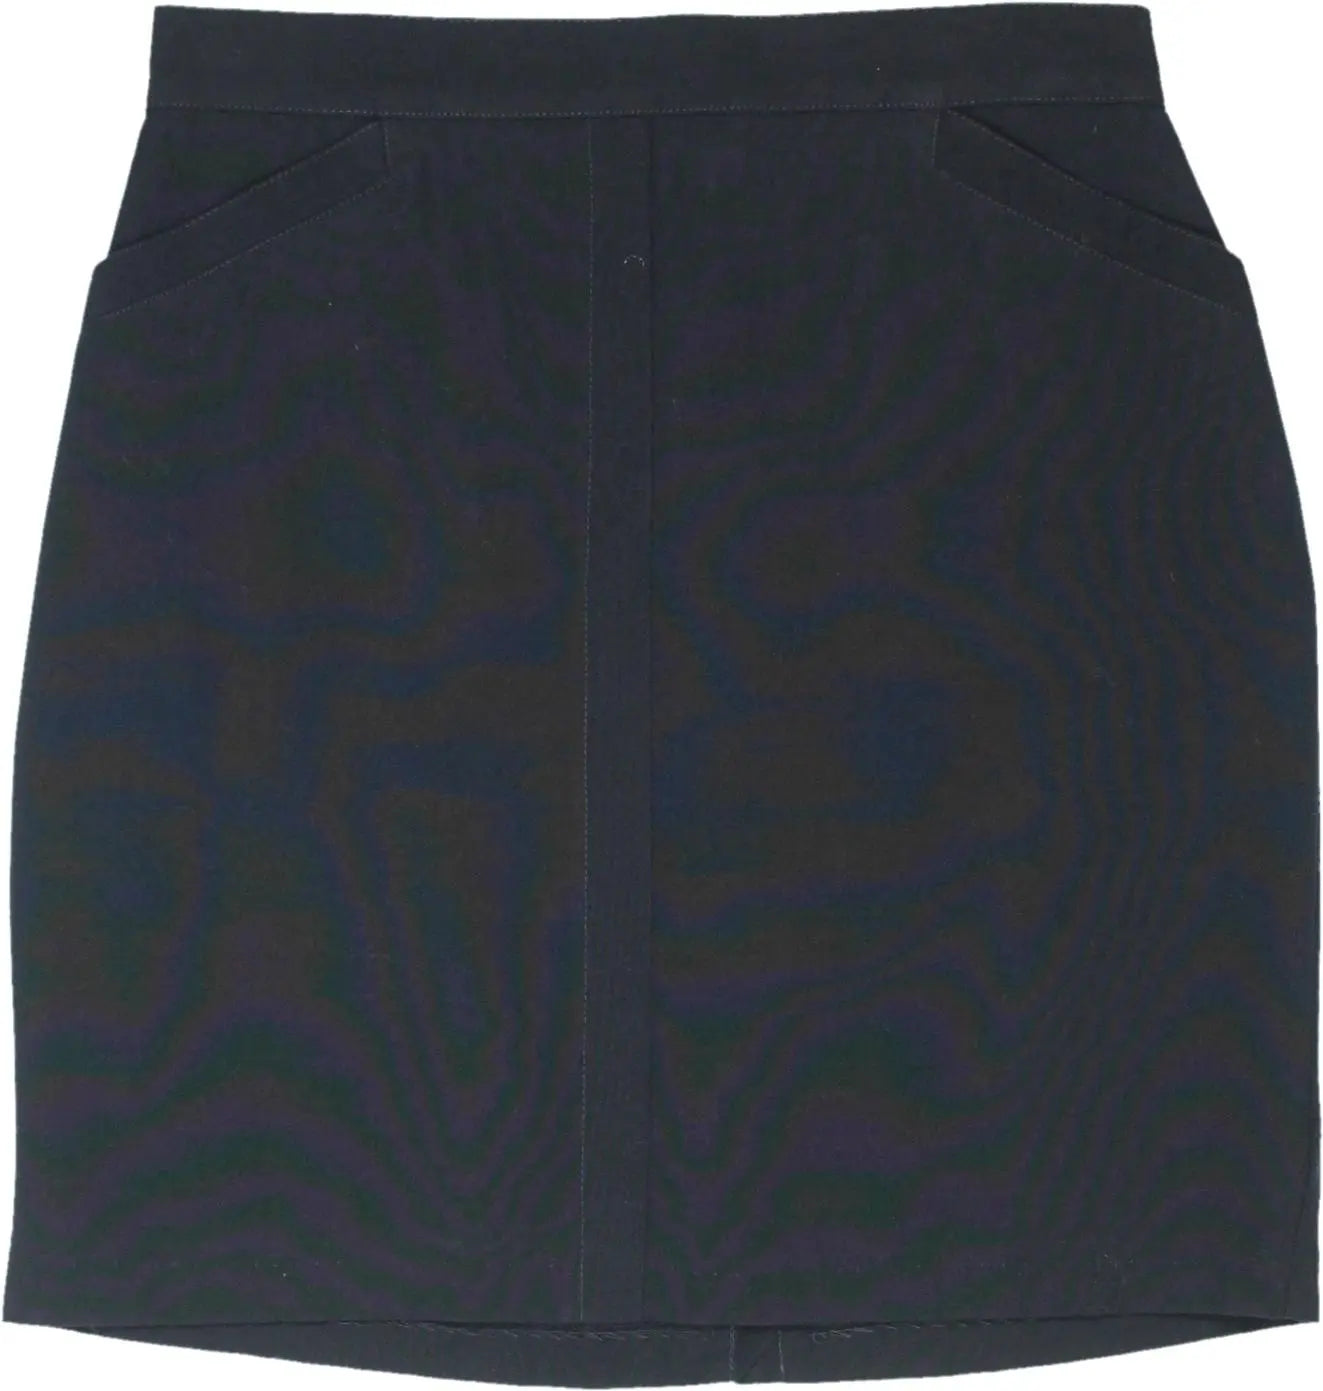 Voila - Black Pencil Skirt- ThriftTale.com - Vintage and second handclothing